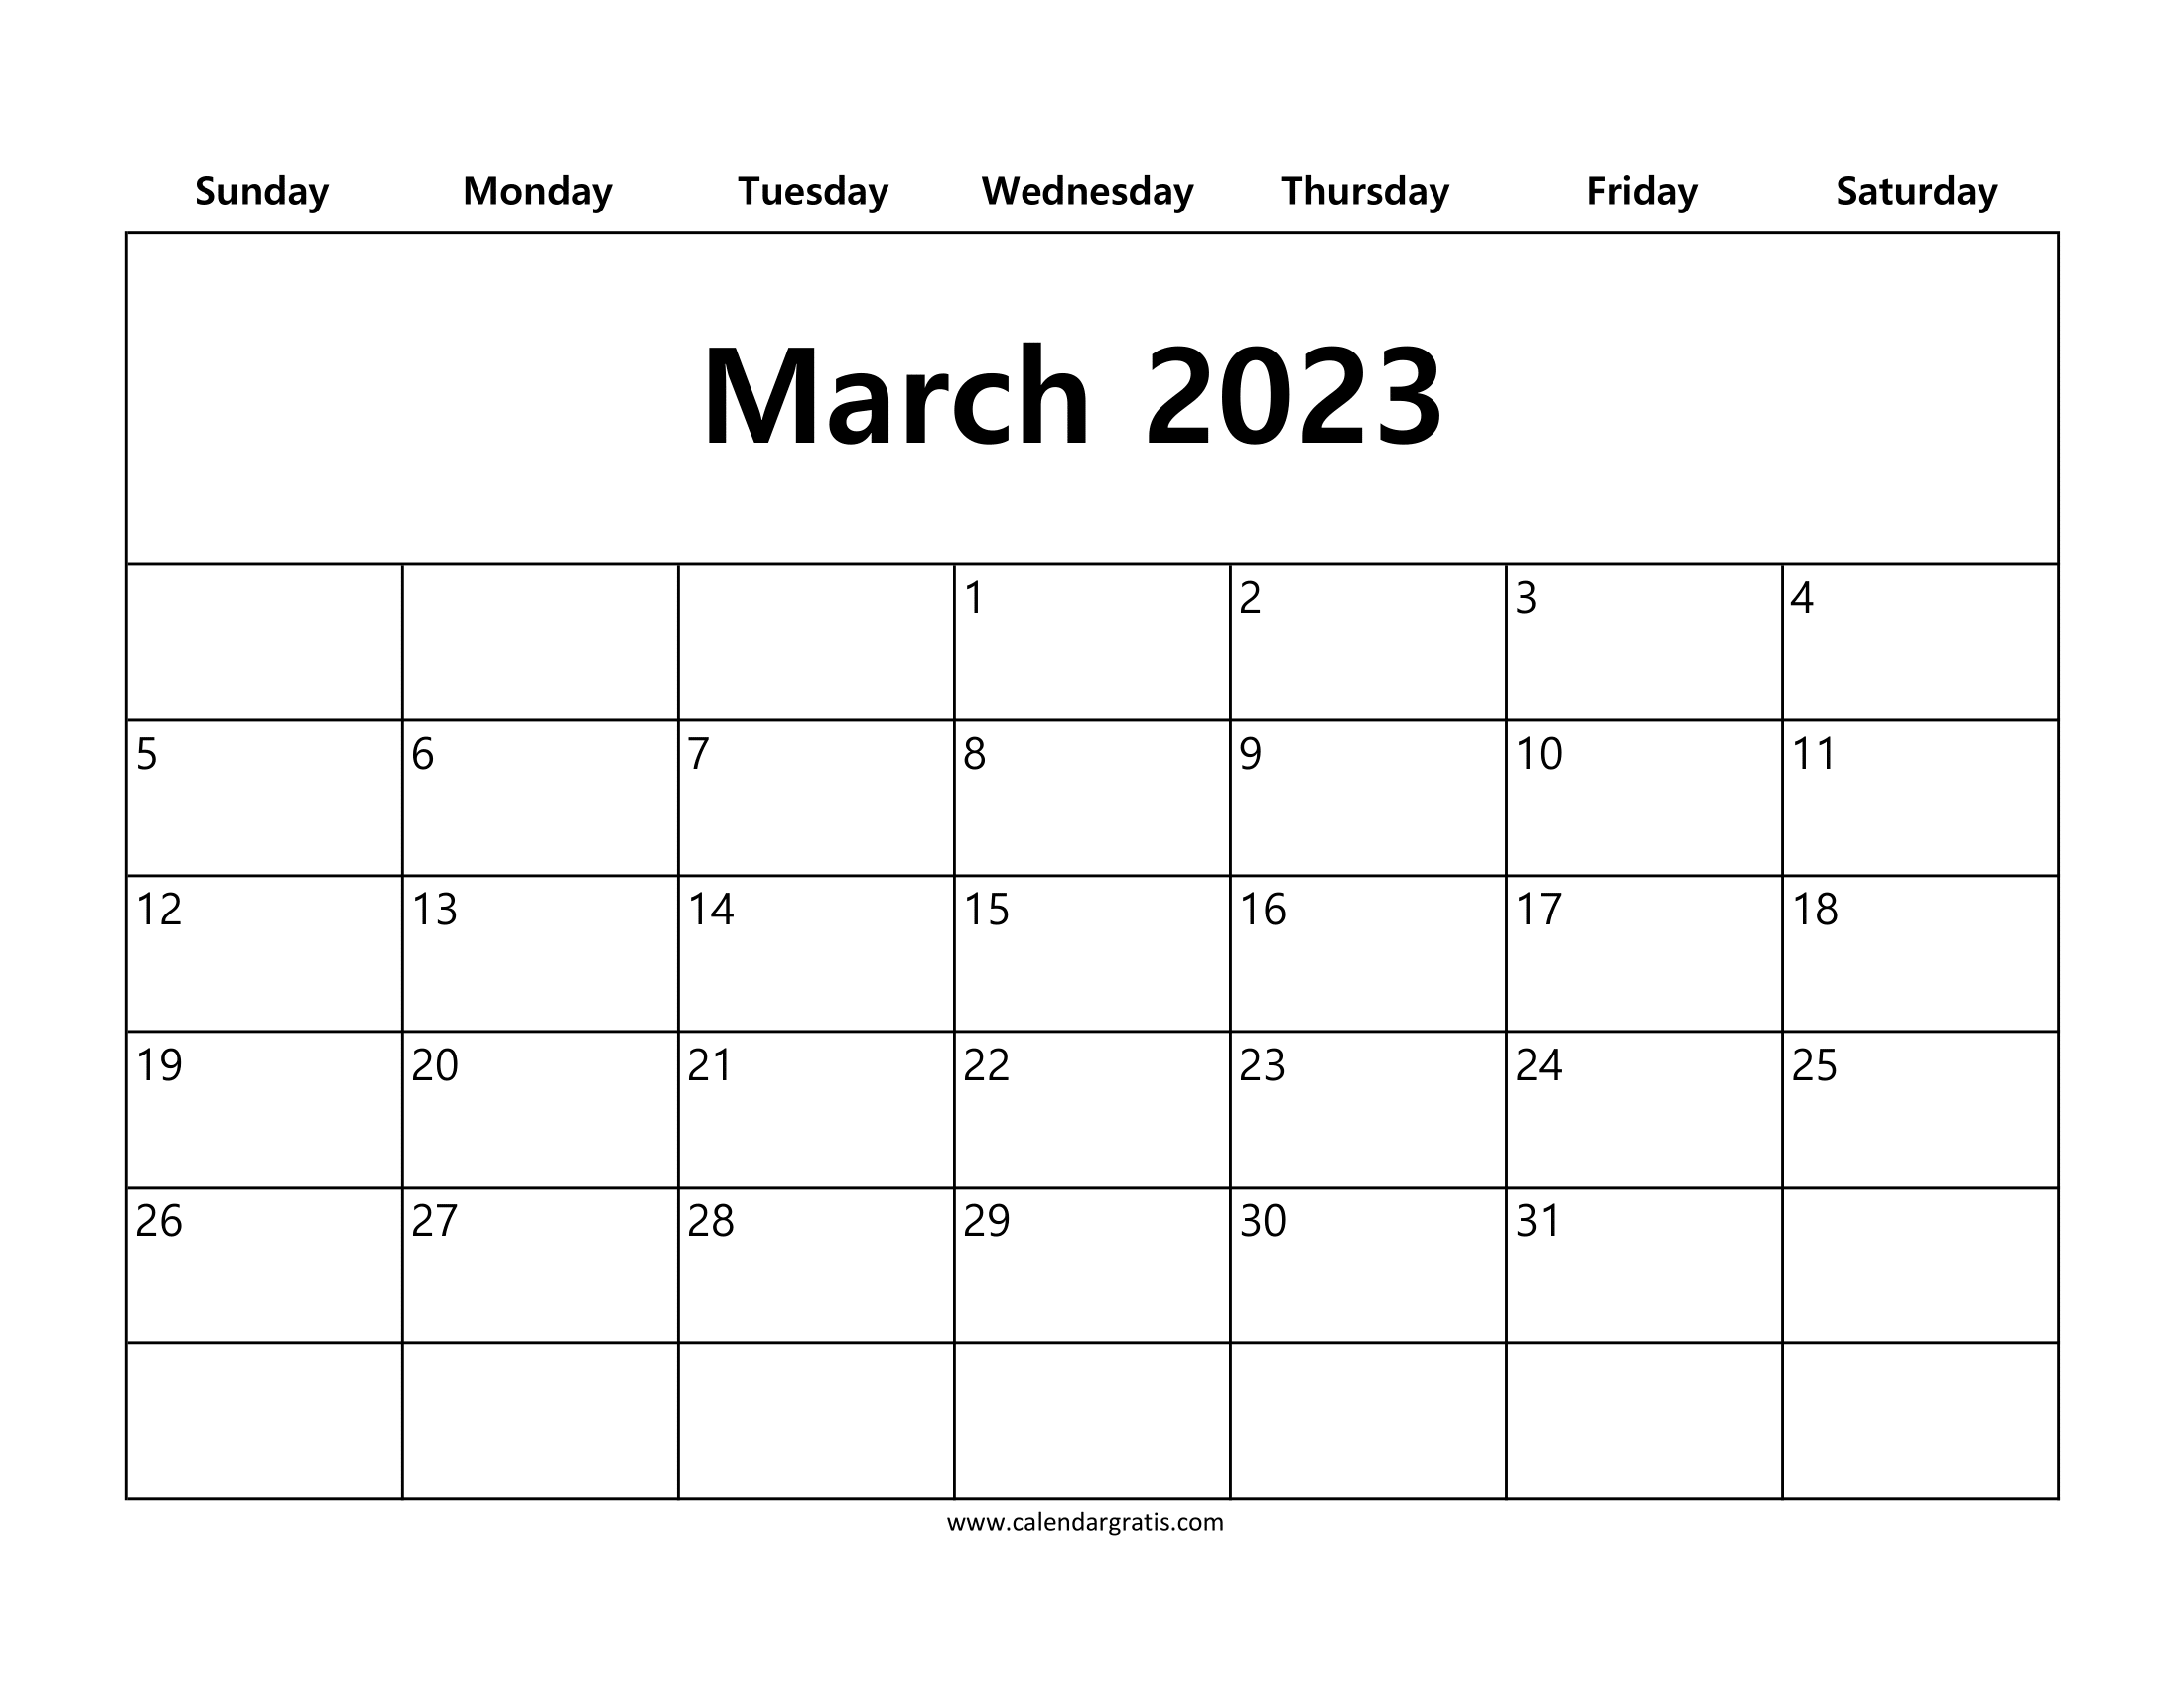 Free printable March 2023 calendar with simple white background layout.